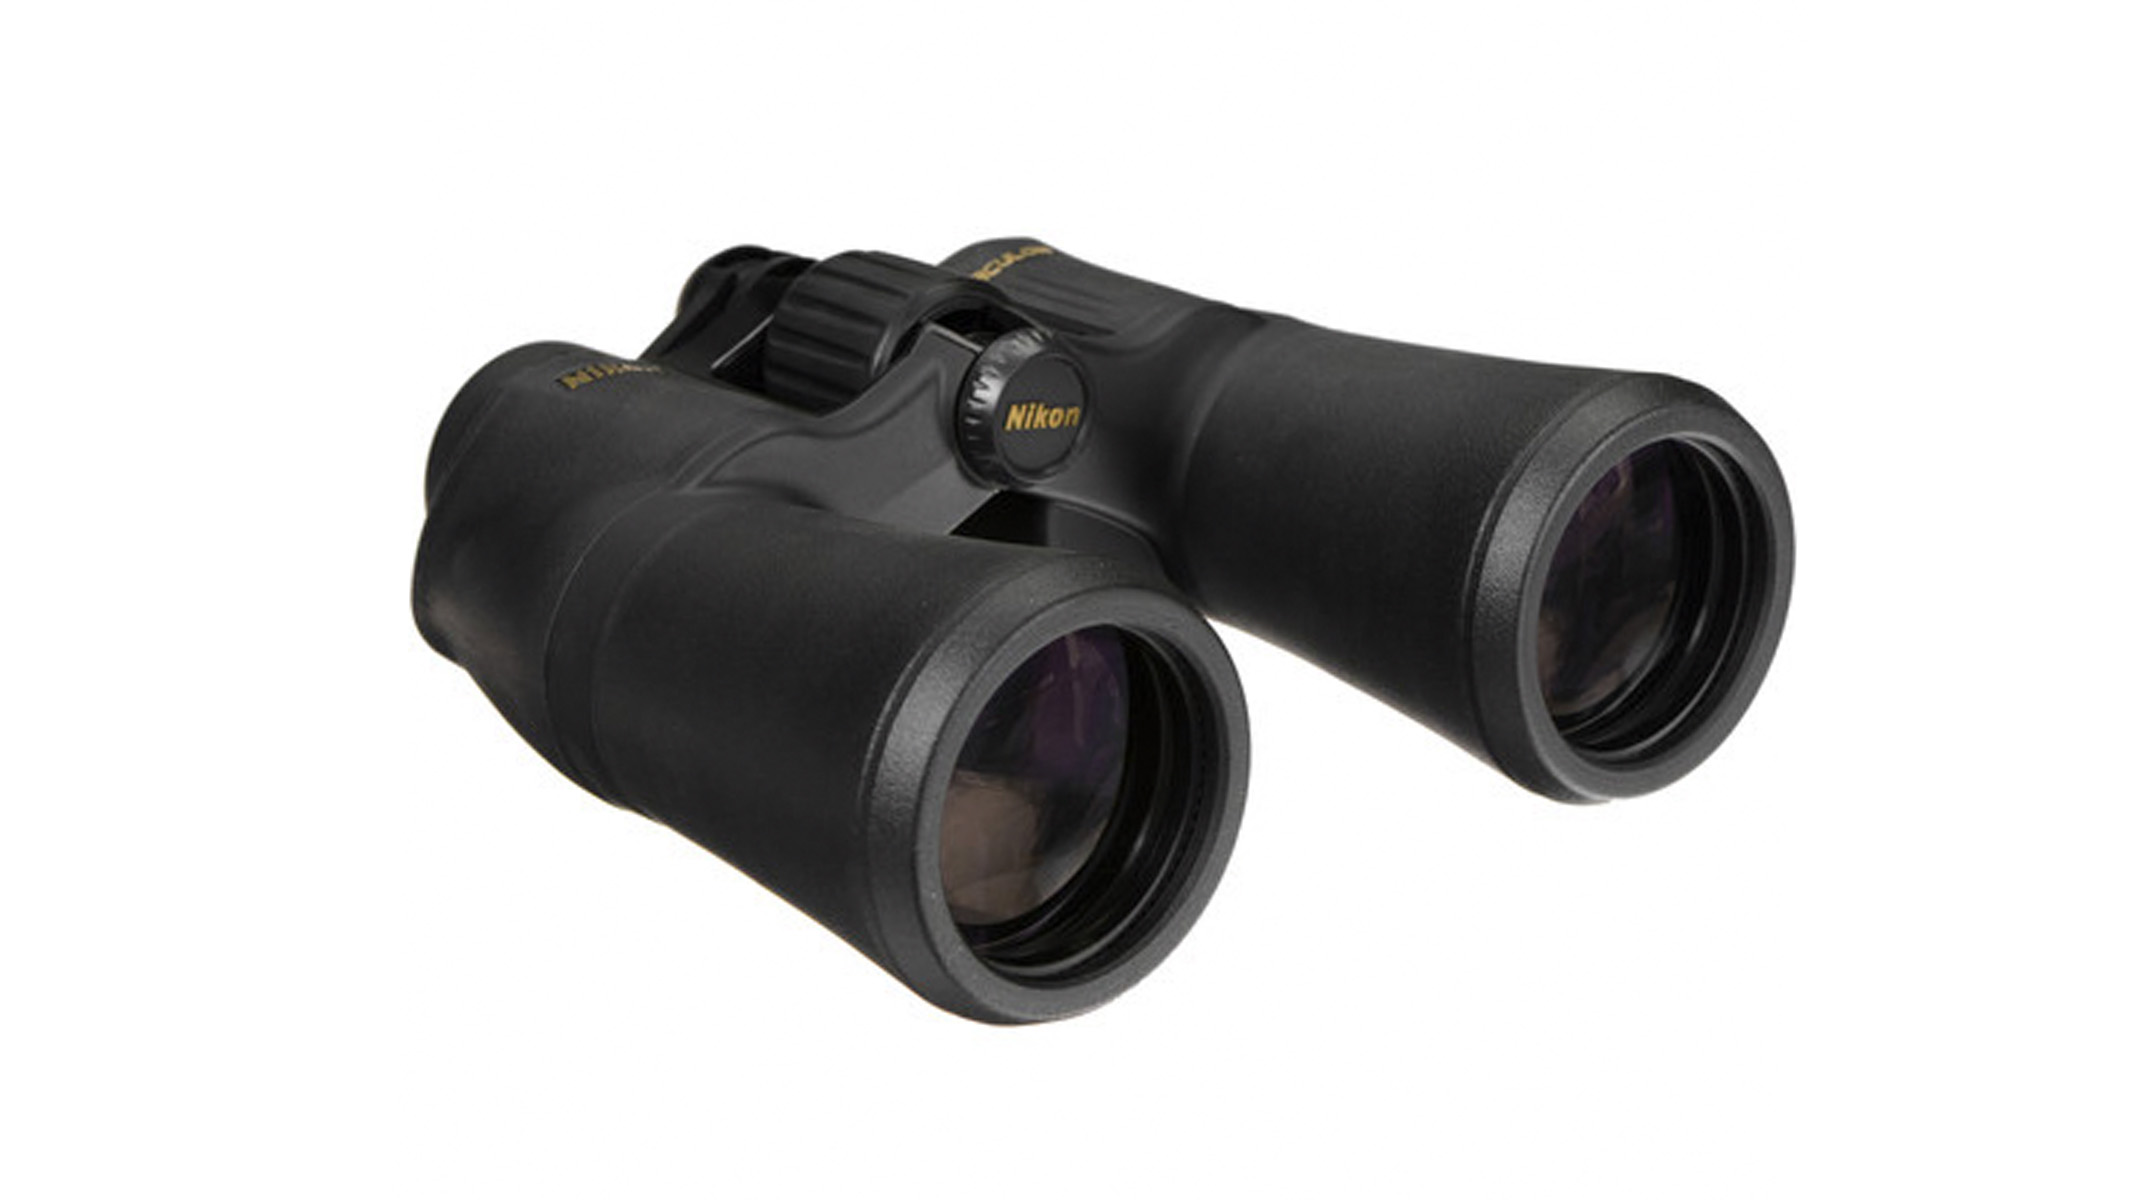 Nikon 10x50 Aculon A211 binocular Prime Day deal — a discount and a free gift at B&H Photo